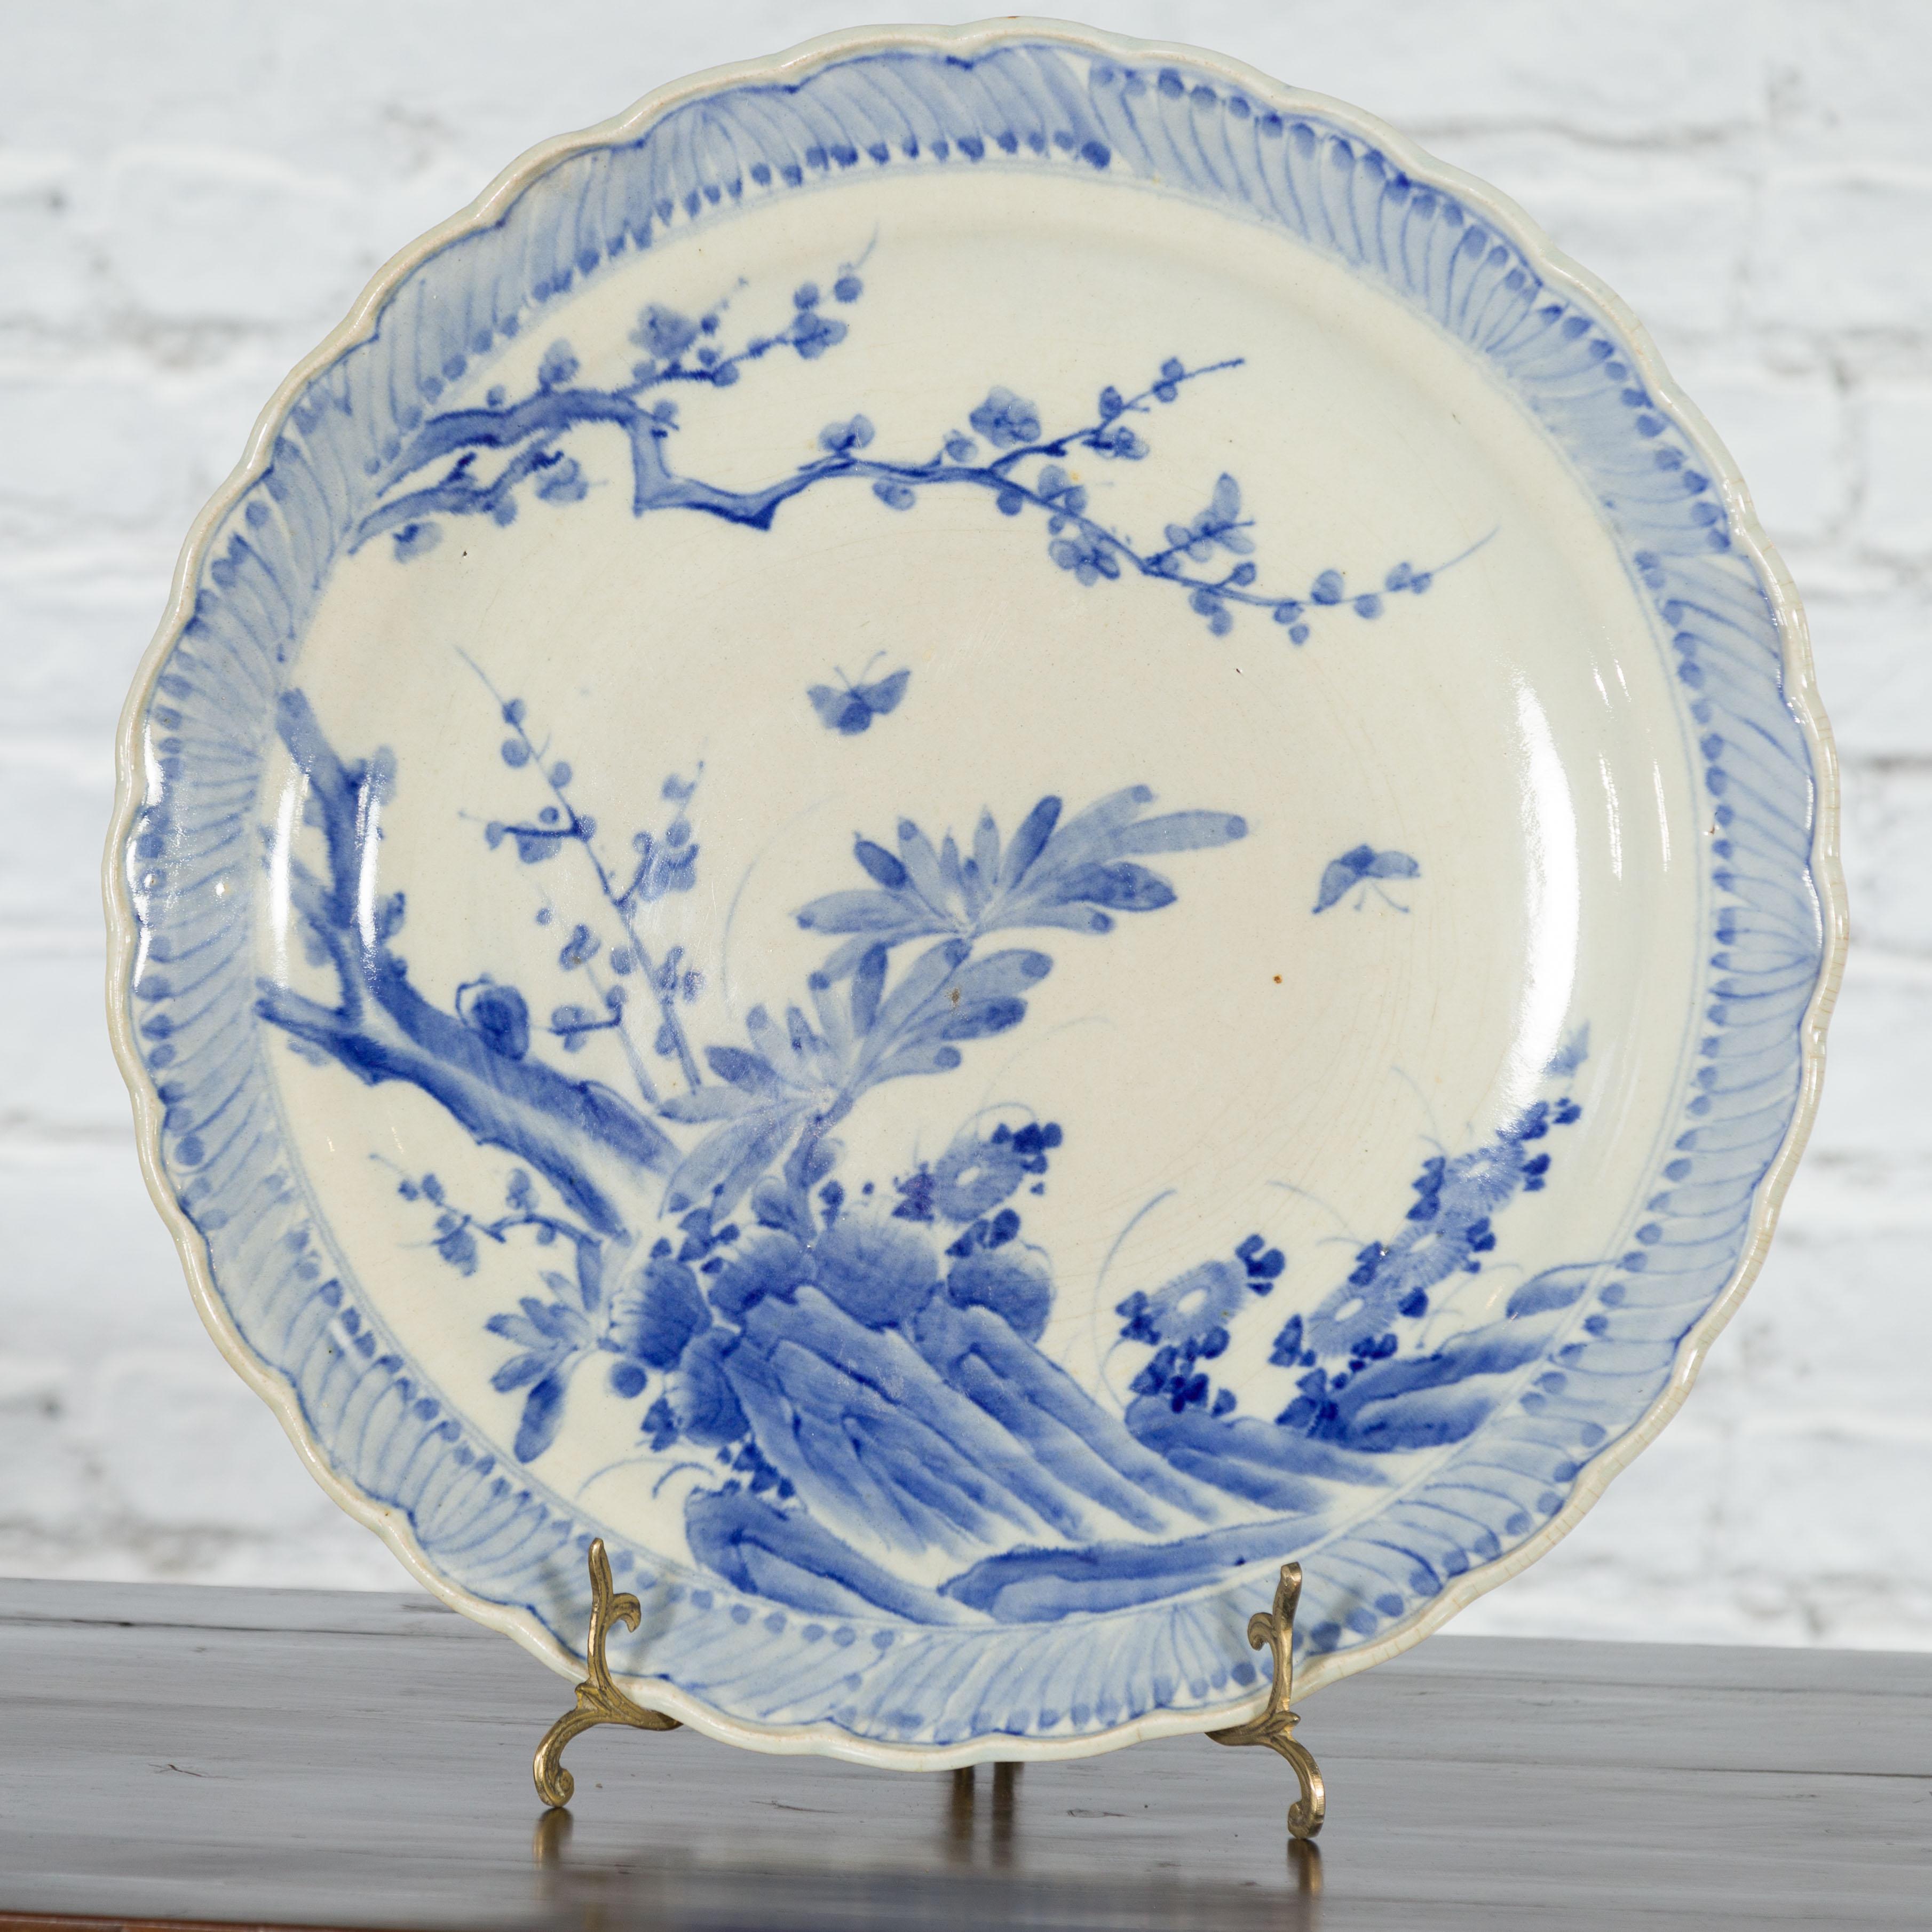 Japanese Hand-Painted Blue and White Porcelain Charger Plate with Foliage Décor In Good Condition For Sale In Yonkers, NY